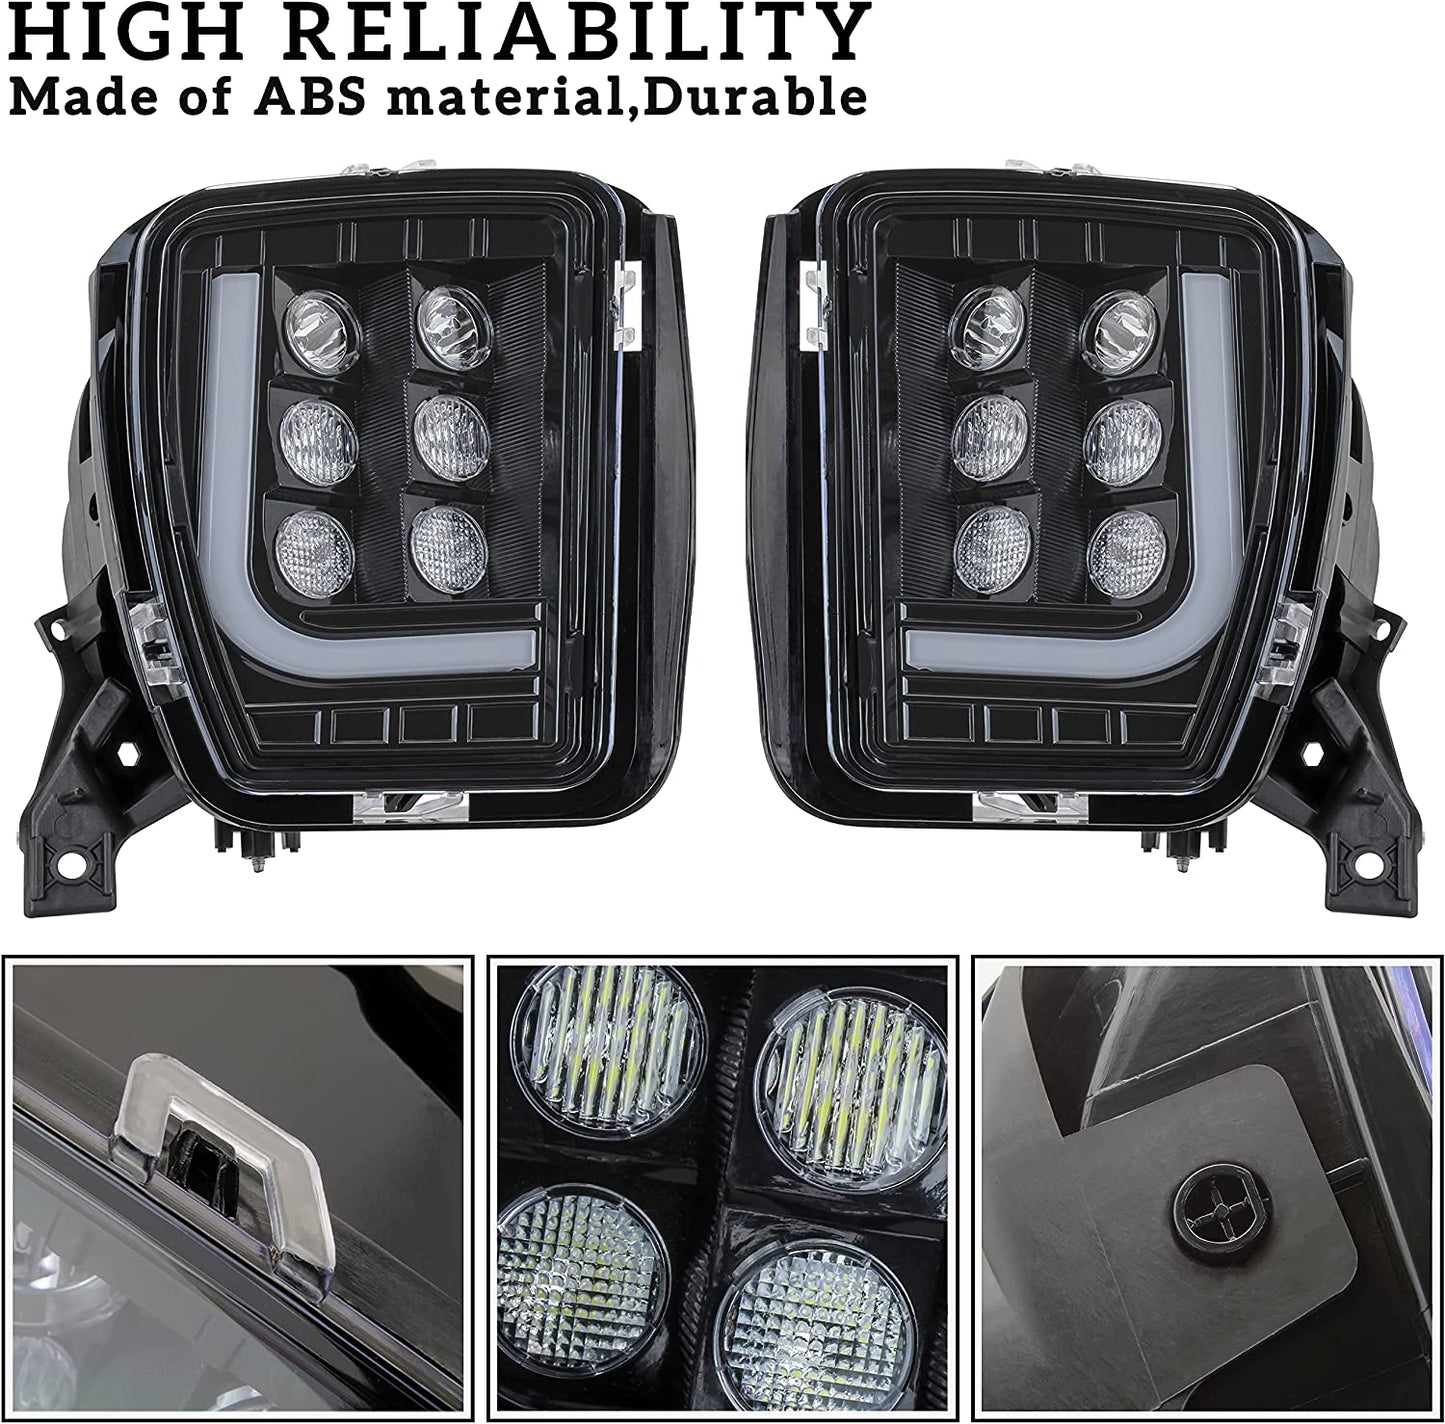 LED Fog Lights with Daytime Running Lights for 2013-2018 Dodge Ram 1500 Accessories